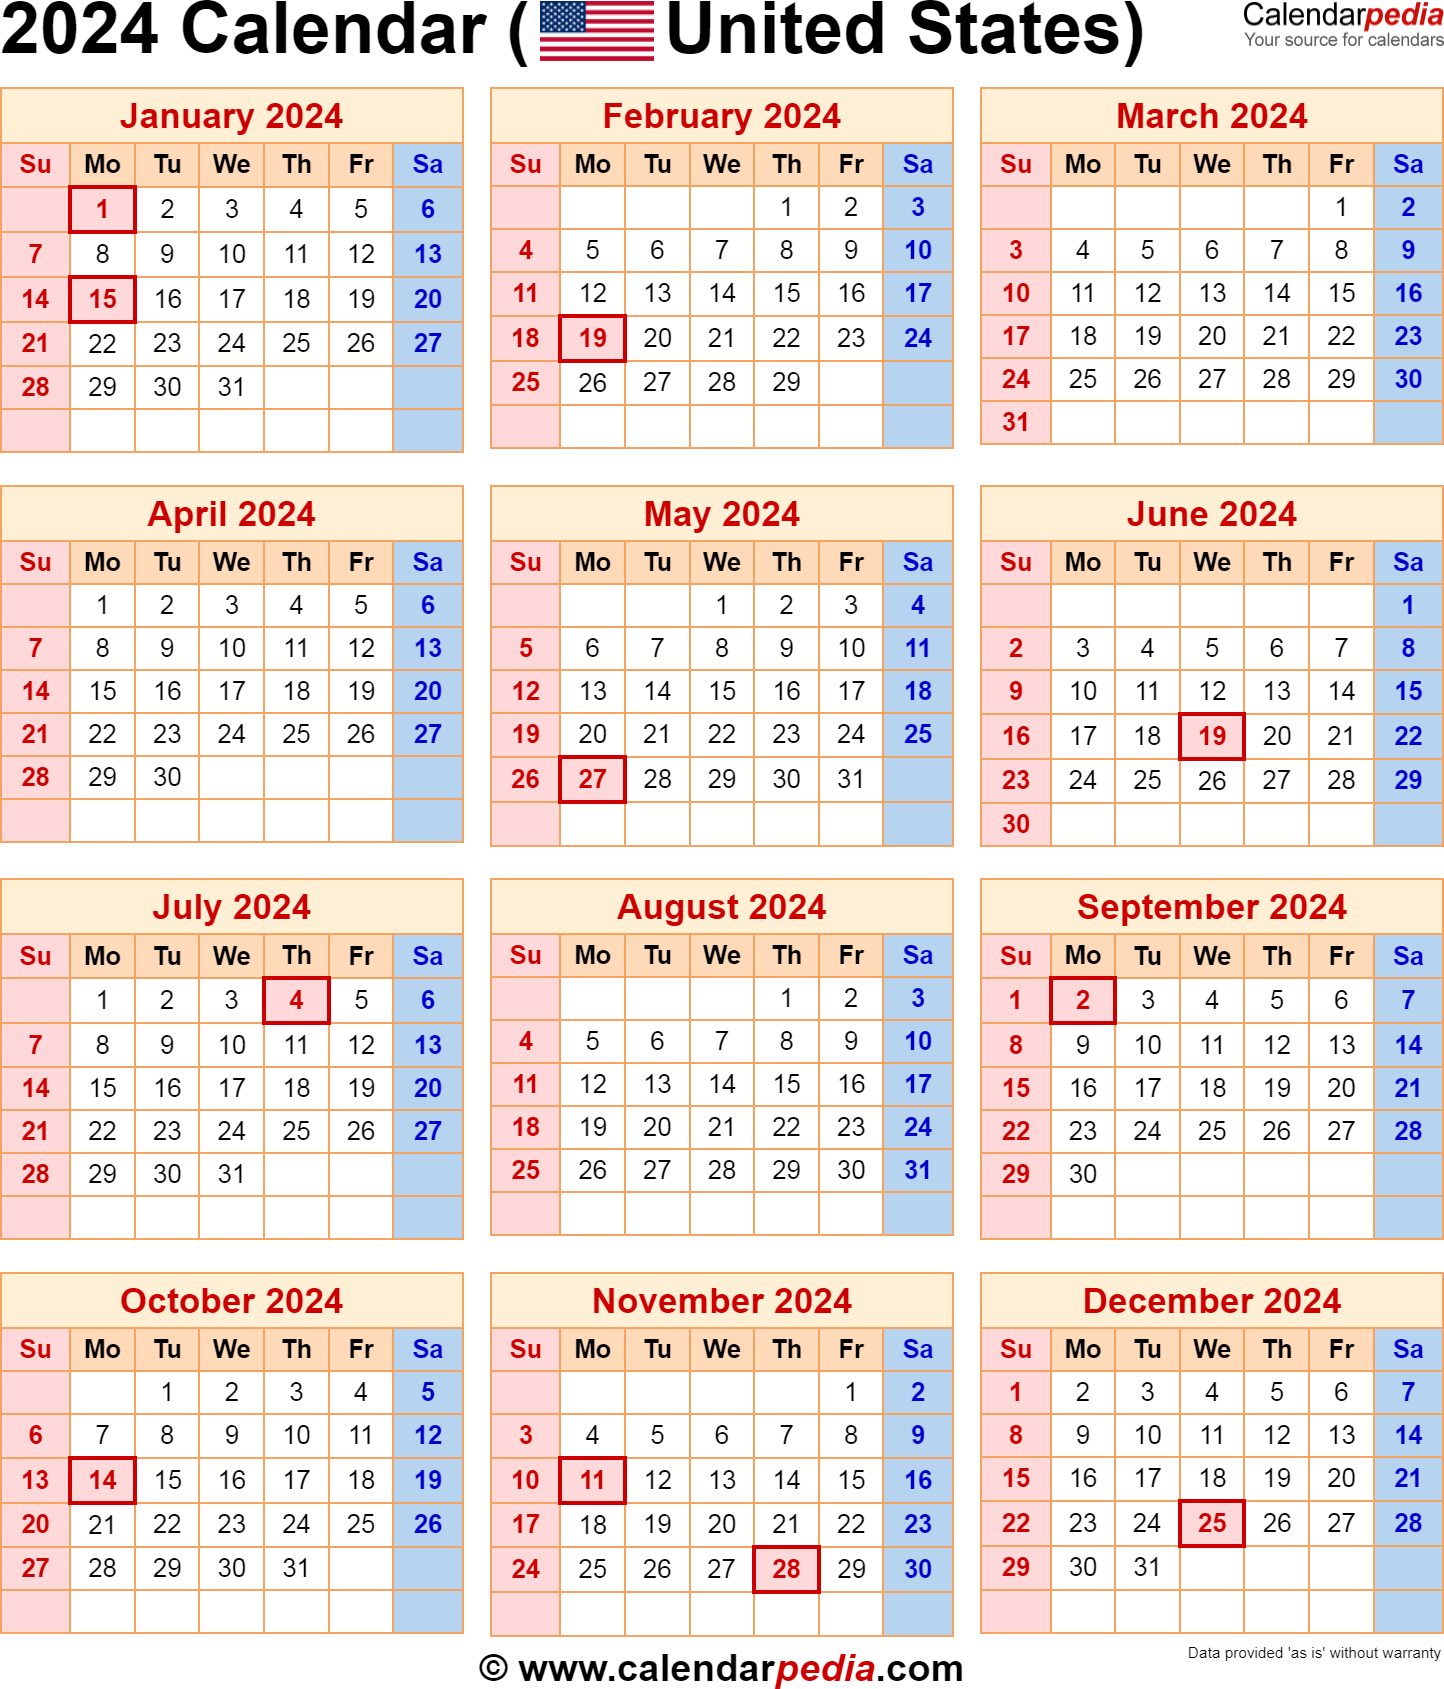 2024 Calendar Printable Free - Free Printable 2024 Calendar 2months In Page With Holidays